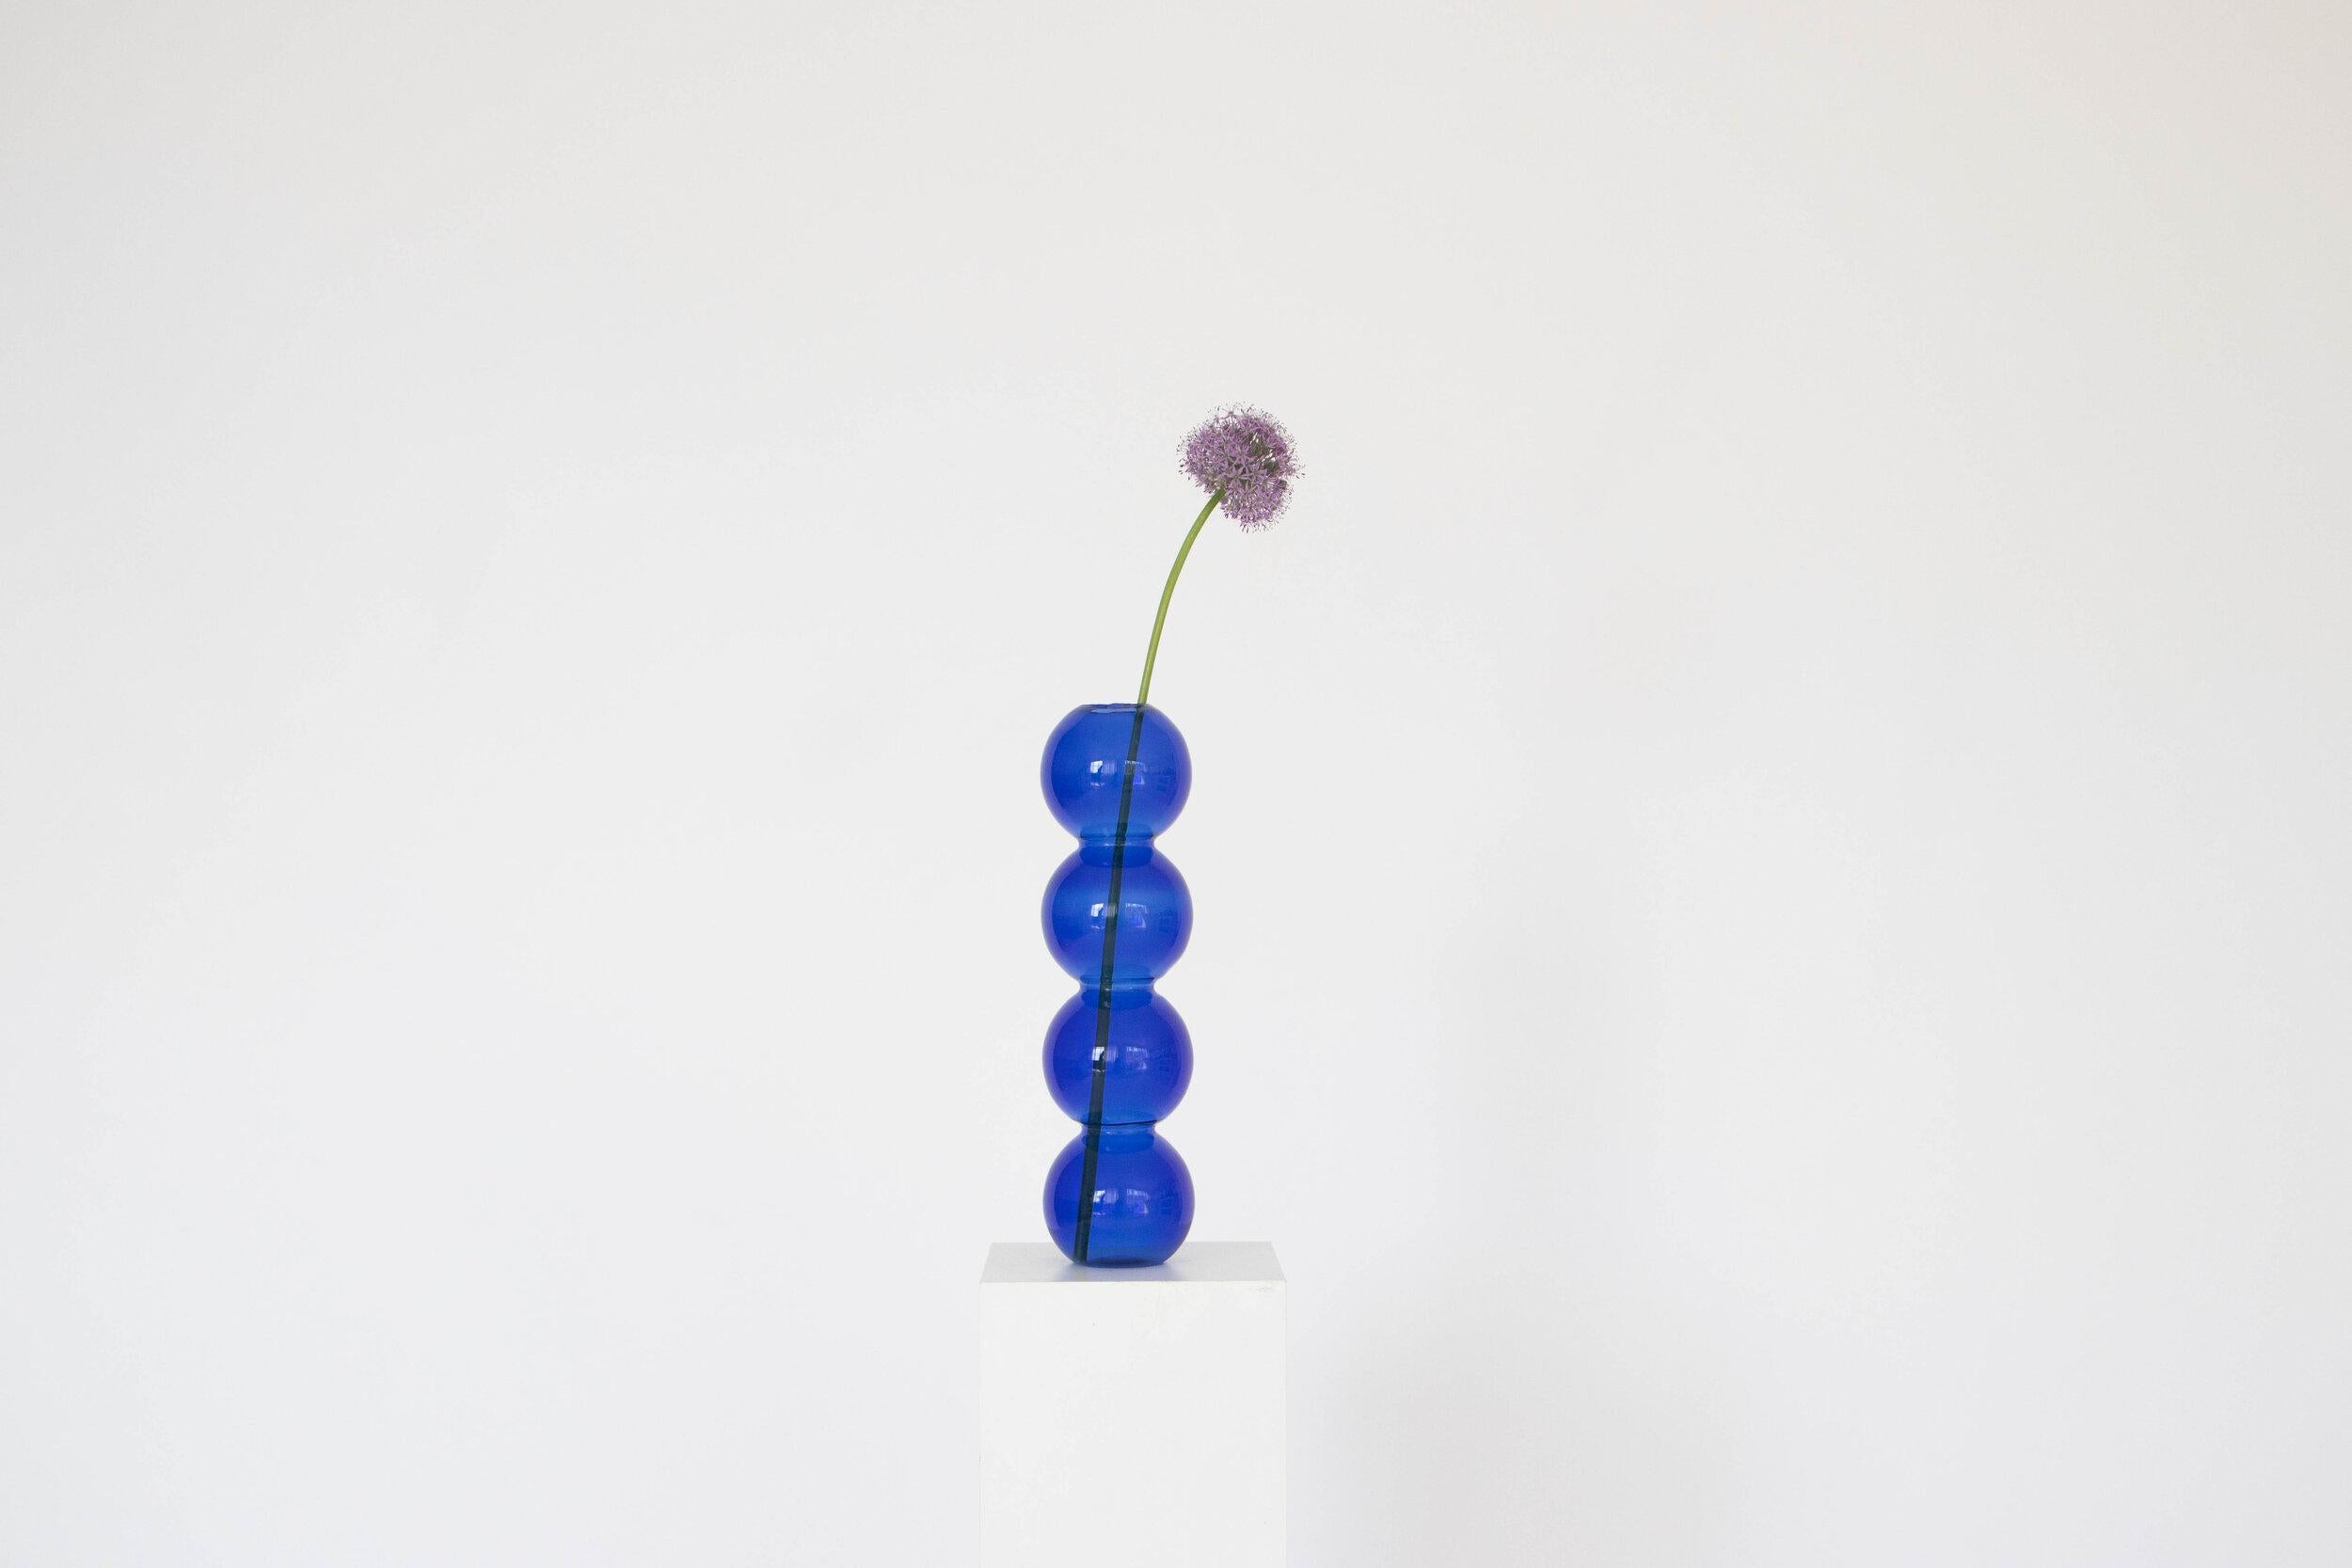 A set of 7 blue bubble vases by Valeria Vasi.
Handmade in Barcelona, 2021.
Materials: glass.
Dimensions: 38 x 10 cm.
Also available in: clear, teal, pink. 

A sculptural vase entirely crafted in Barcelona by a skillful local artisan using a